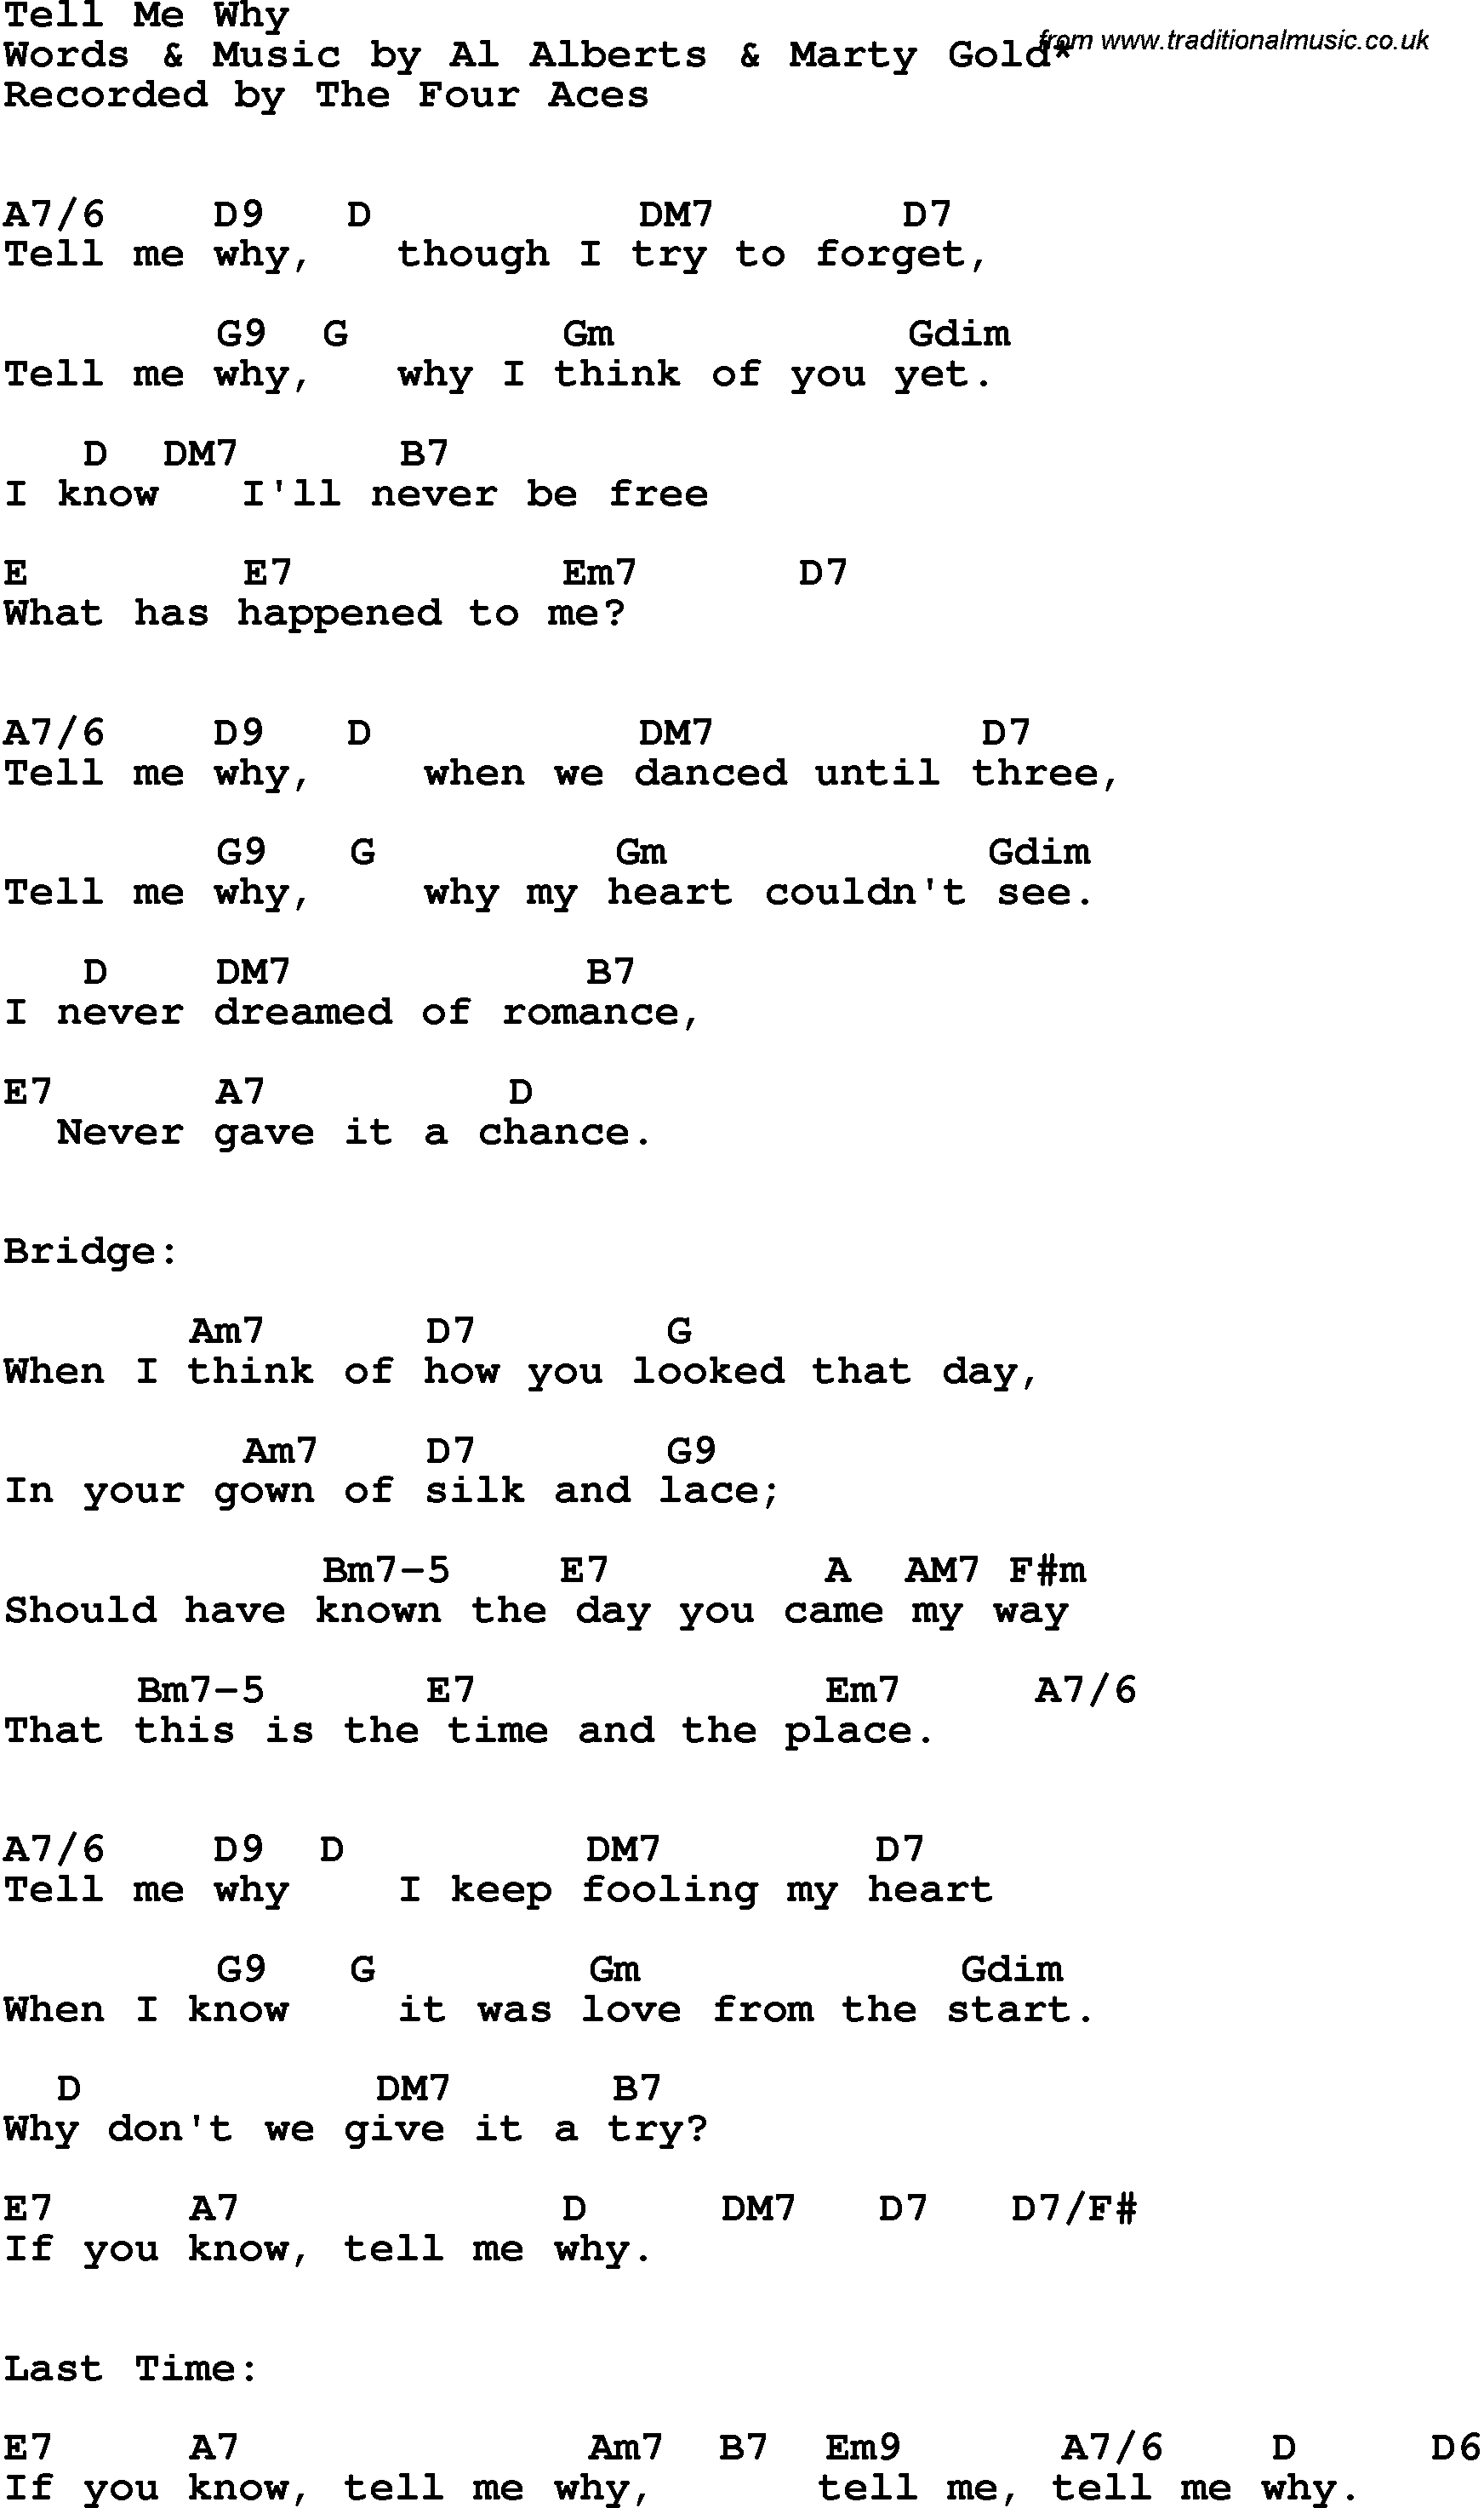 Song Lyrics with guitar chords for Tell Me Why - The Four Aces, 1951